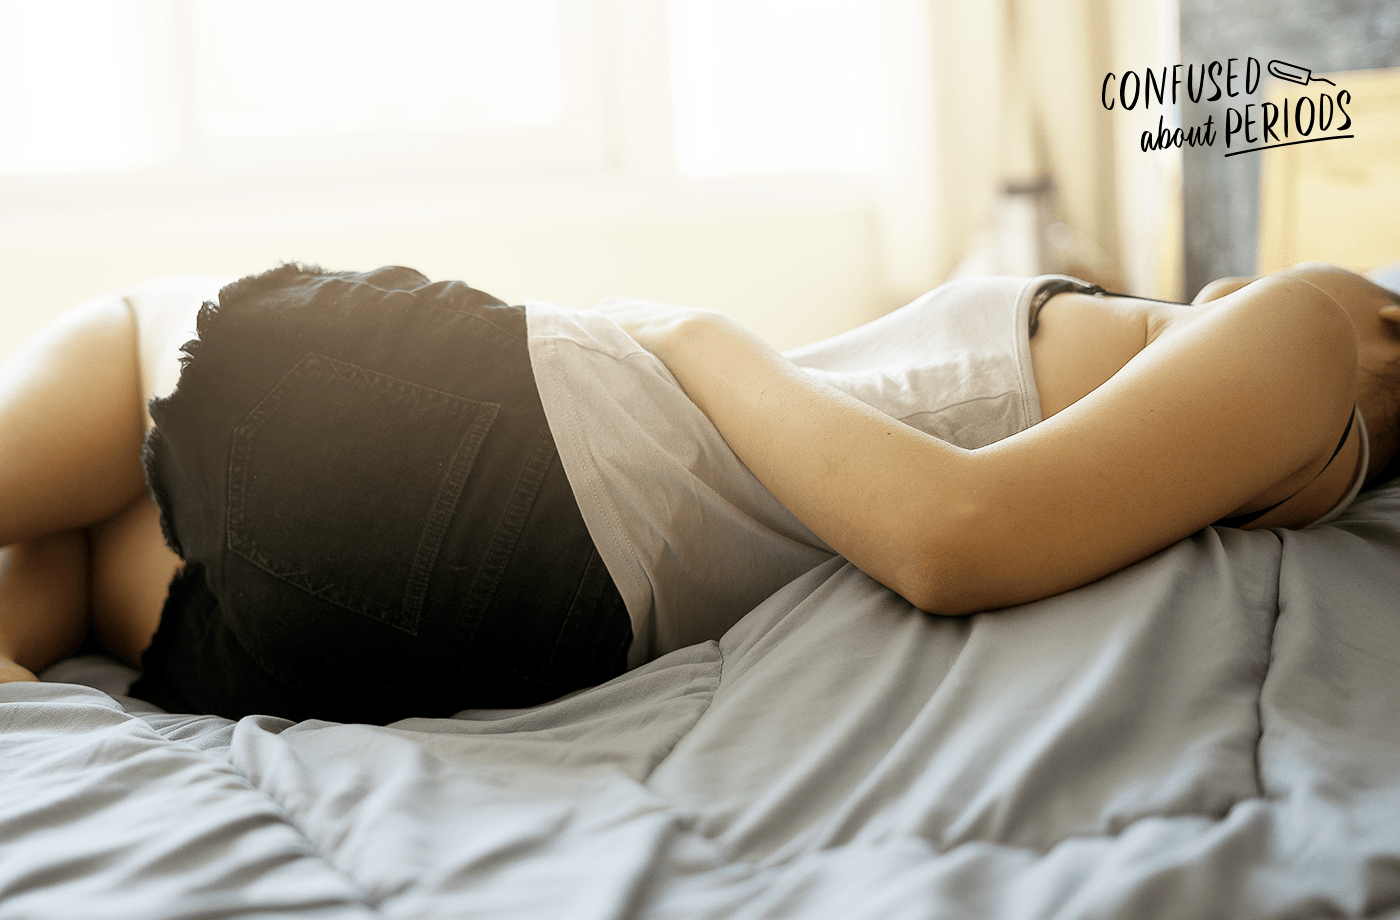 menstrual cycle woman lying on bed